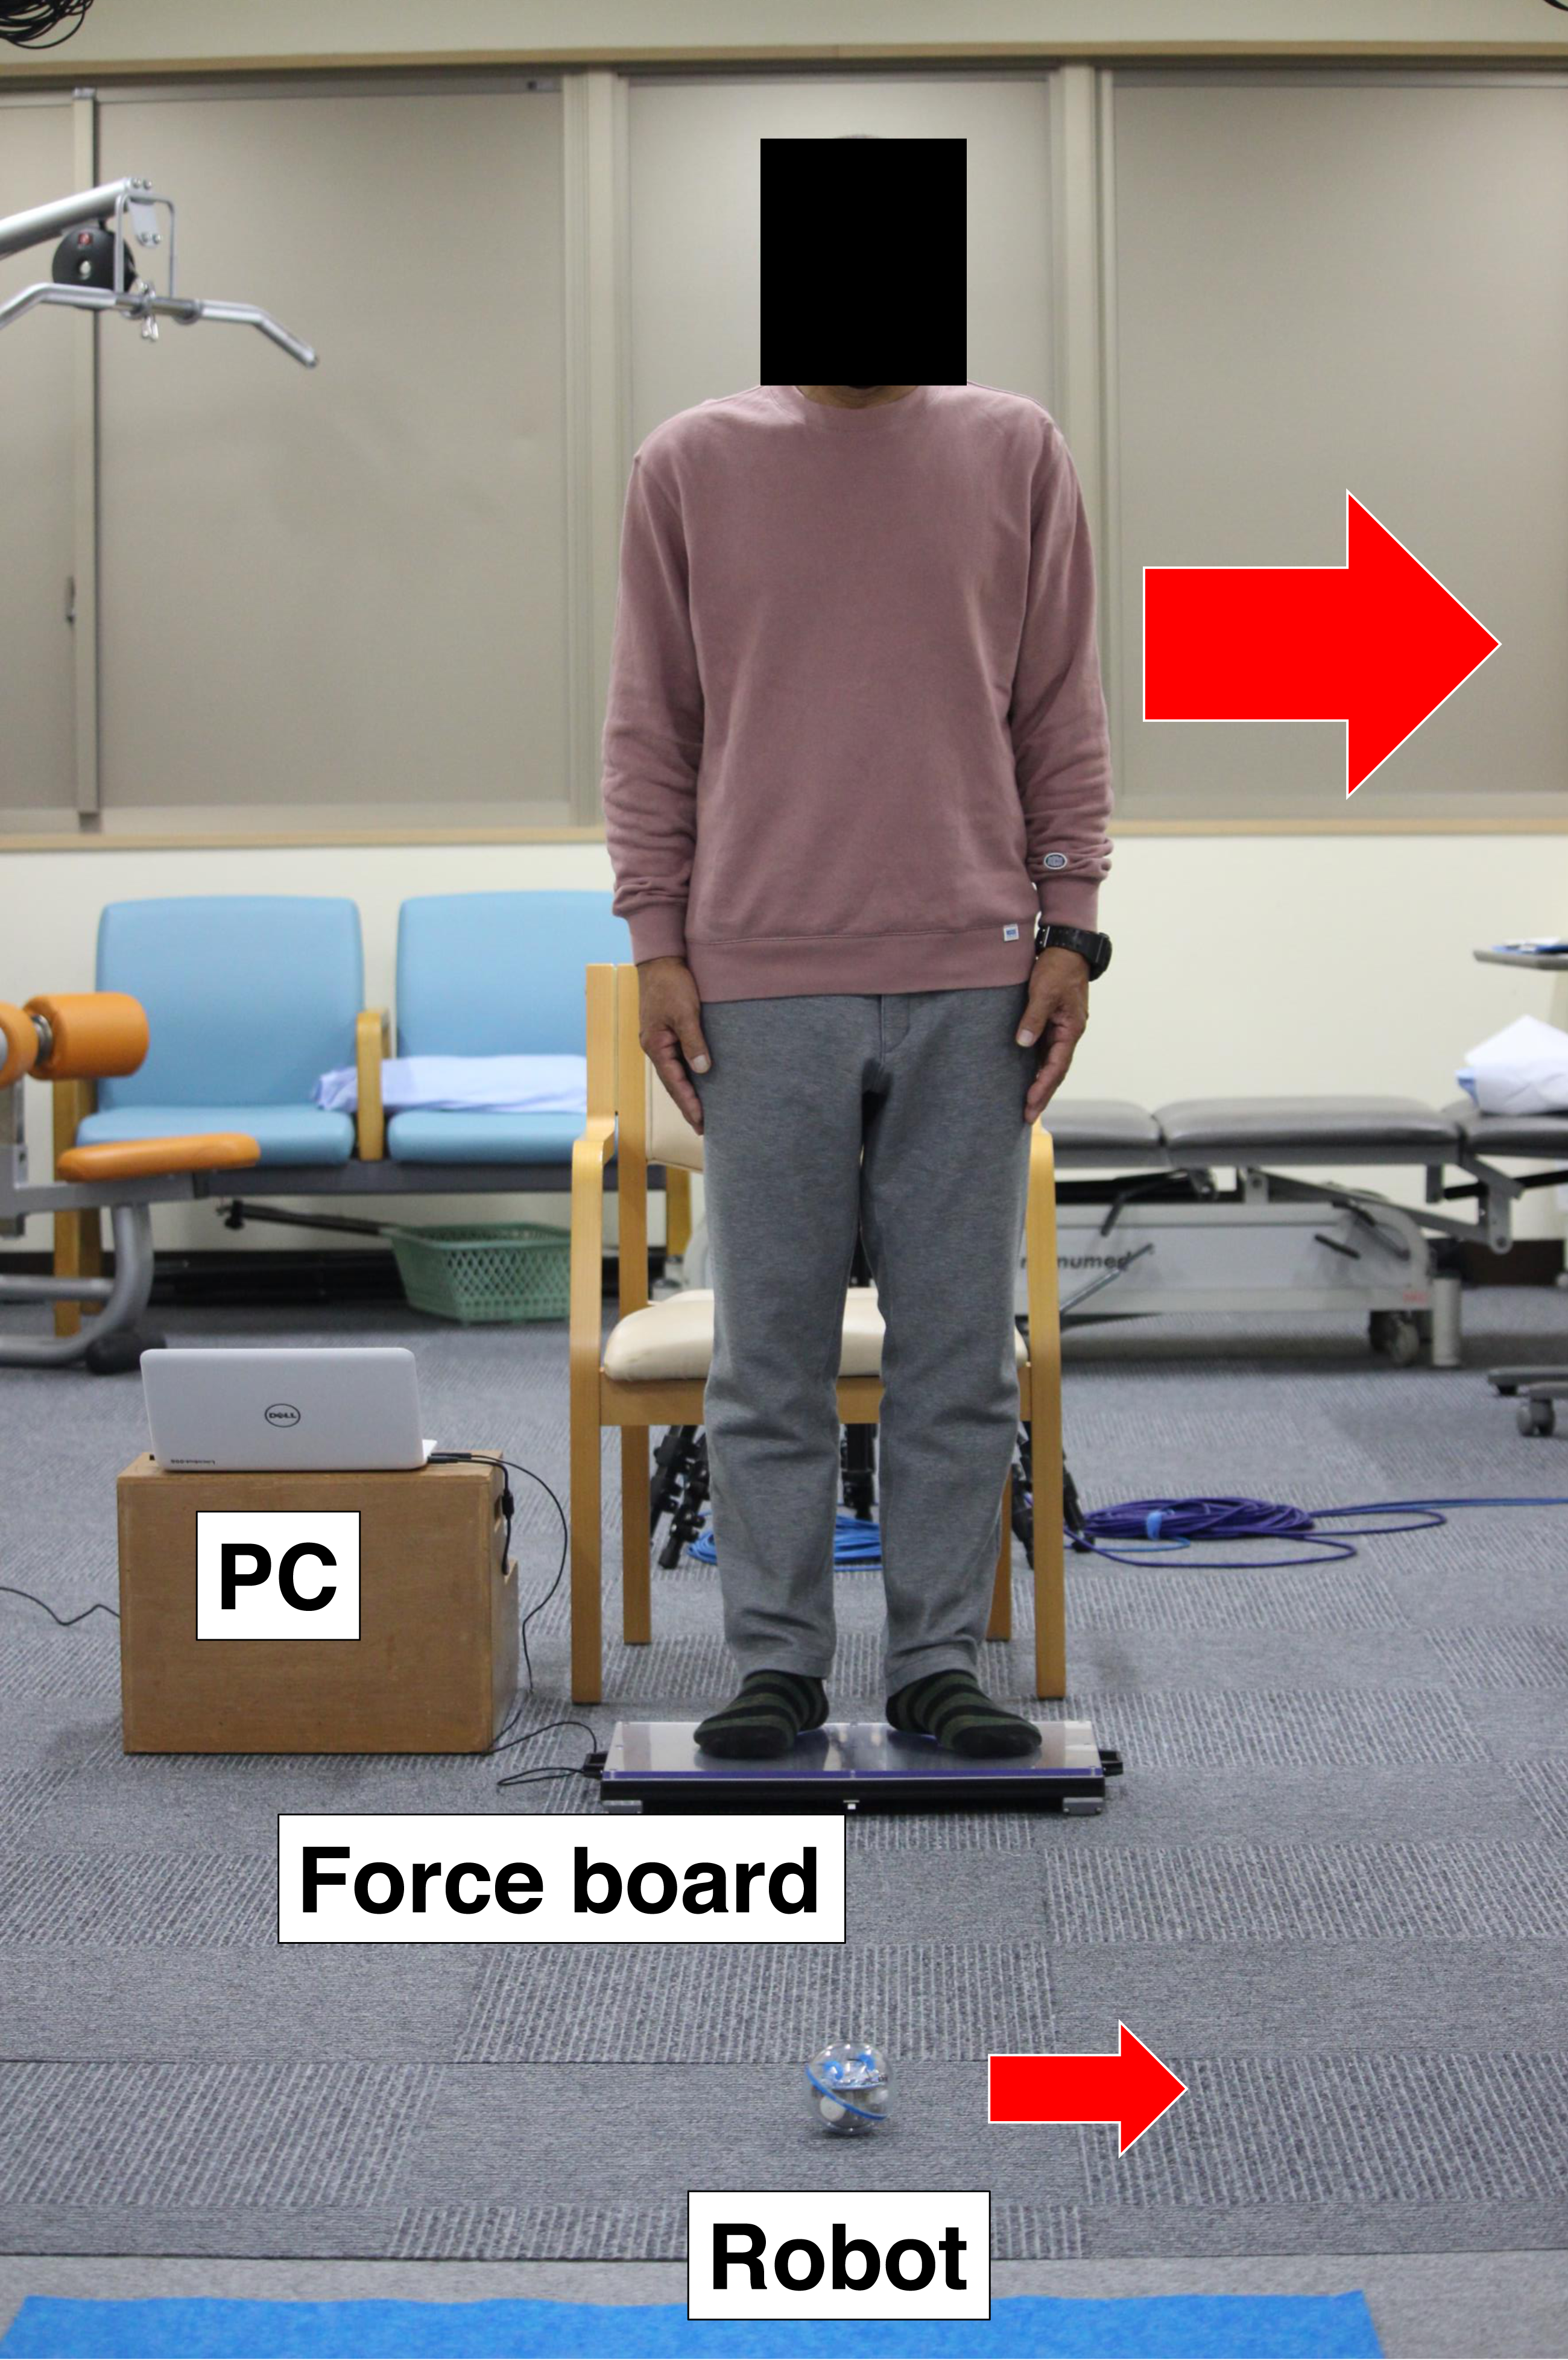 Weight-shifting-based robot control system improves the weight-bearing rate and balance ability of the static standing position in hip osteoarthritis patients a randomized controlled trial focusing on outcomes after total hip arthroplasty PeerJ image